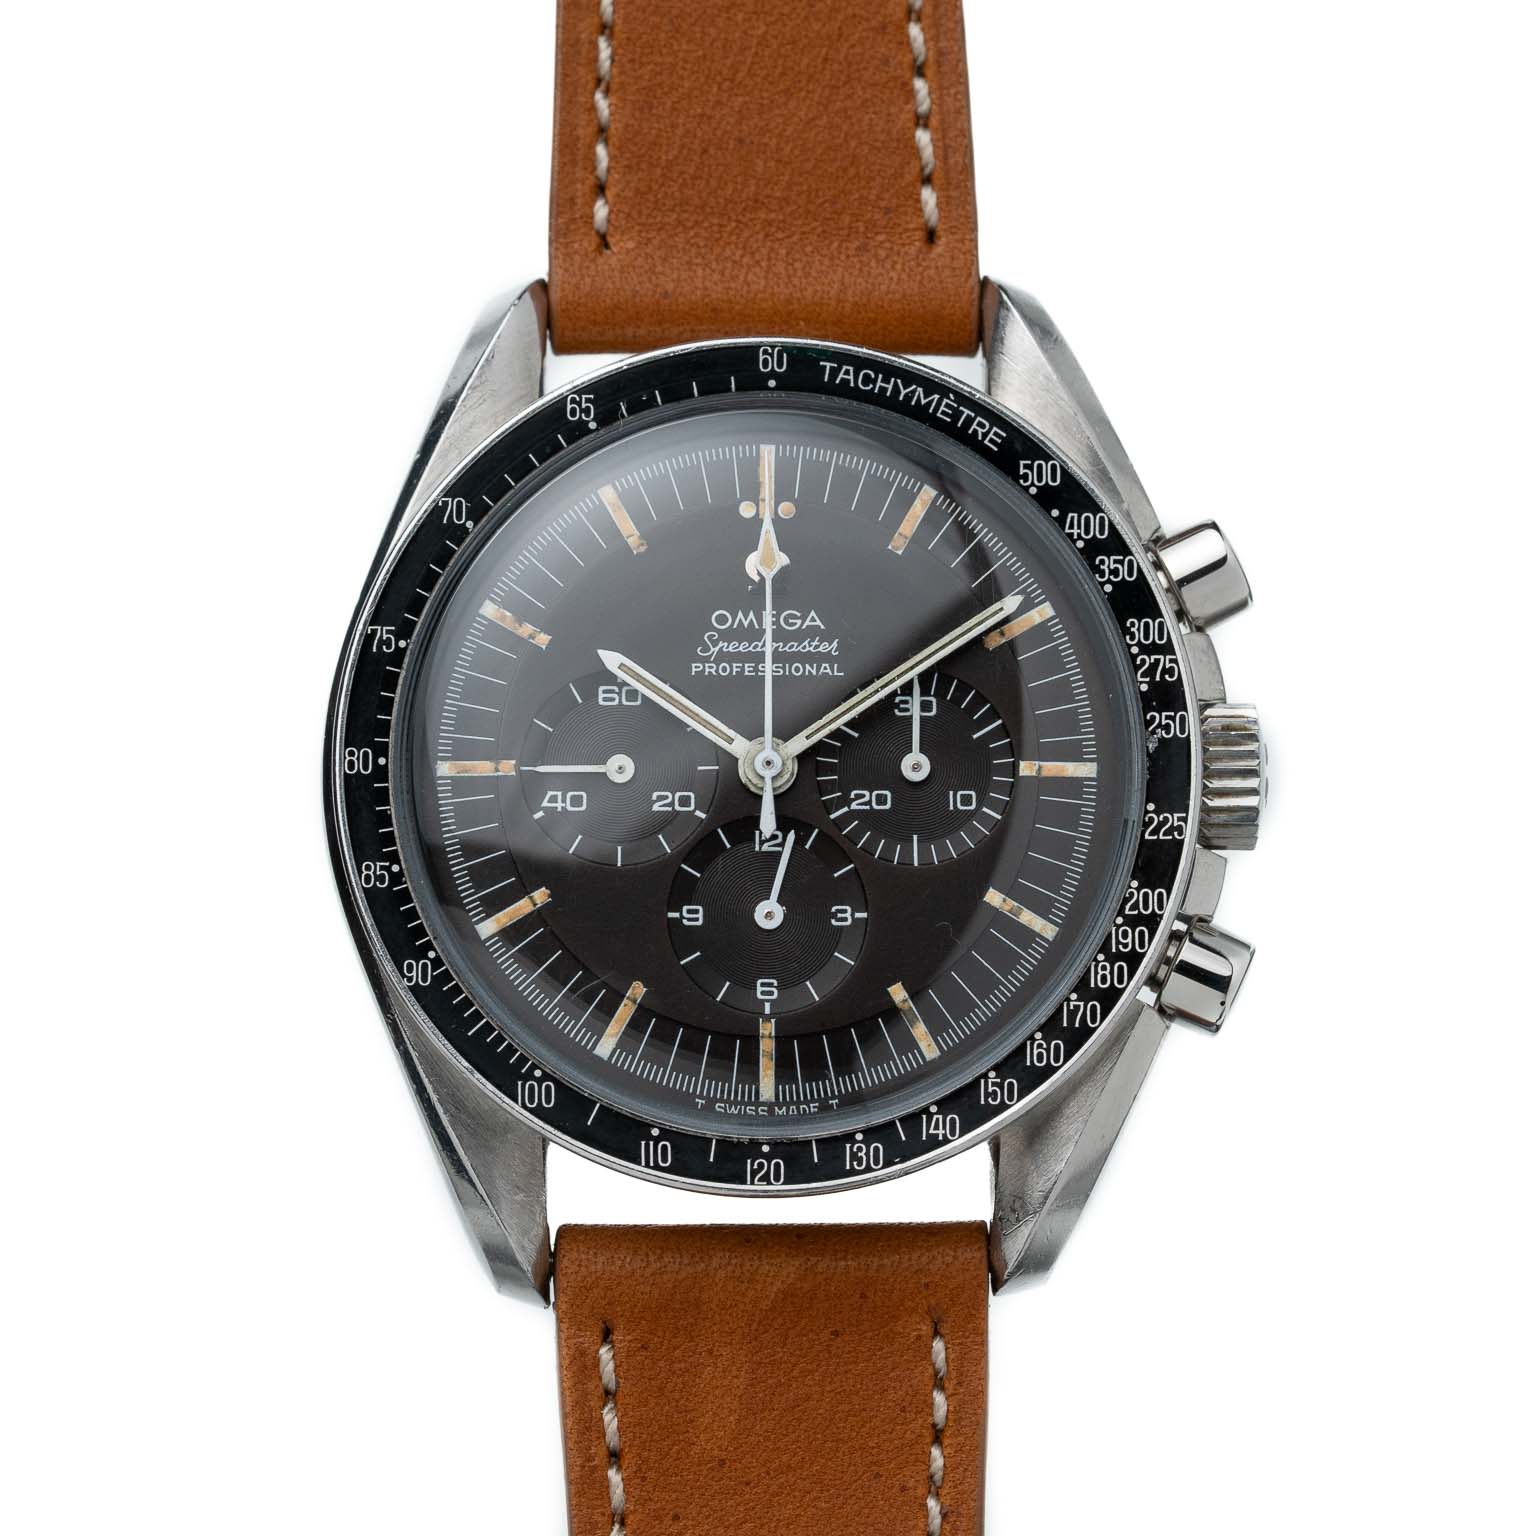 Omega Speedmaster Professional 145.012-67 from 1967 watch front